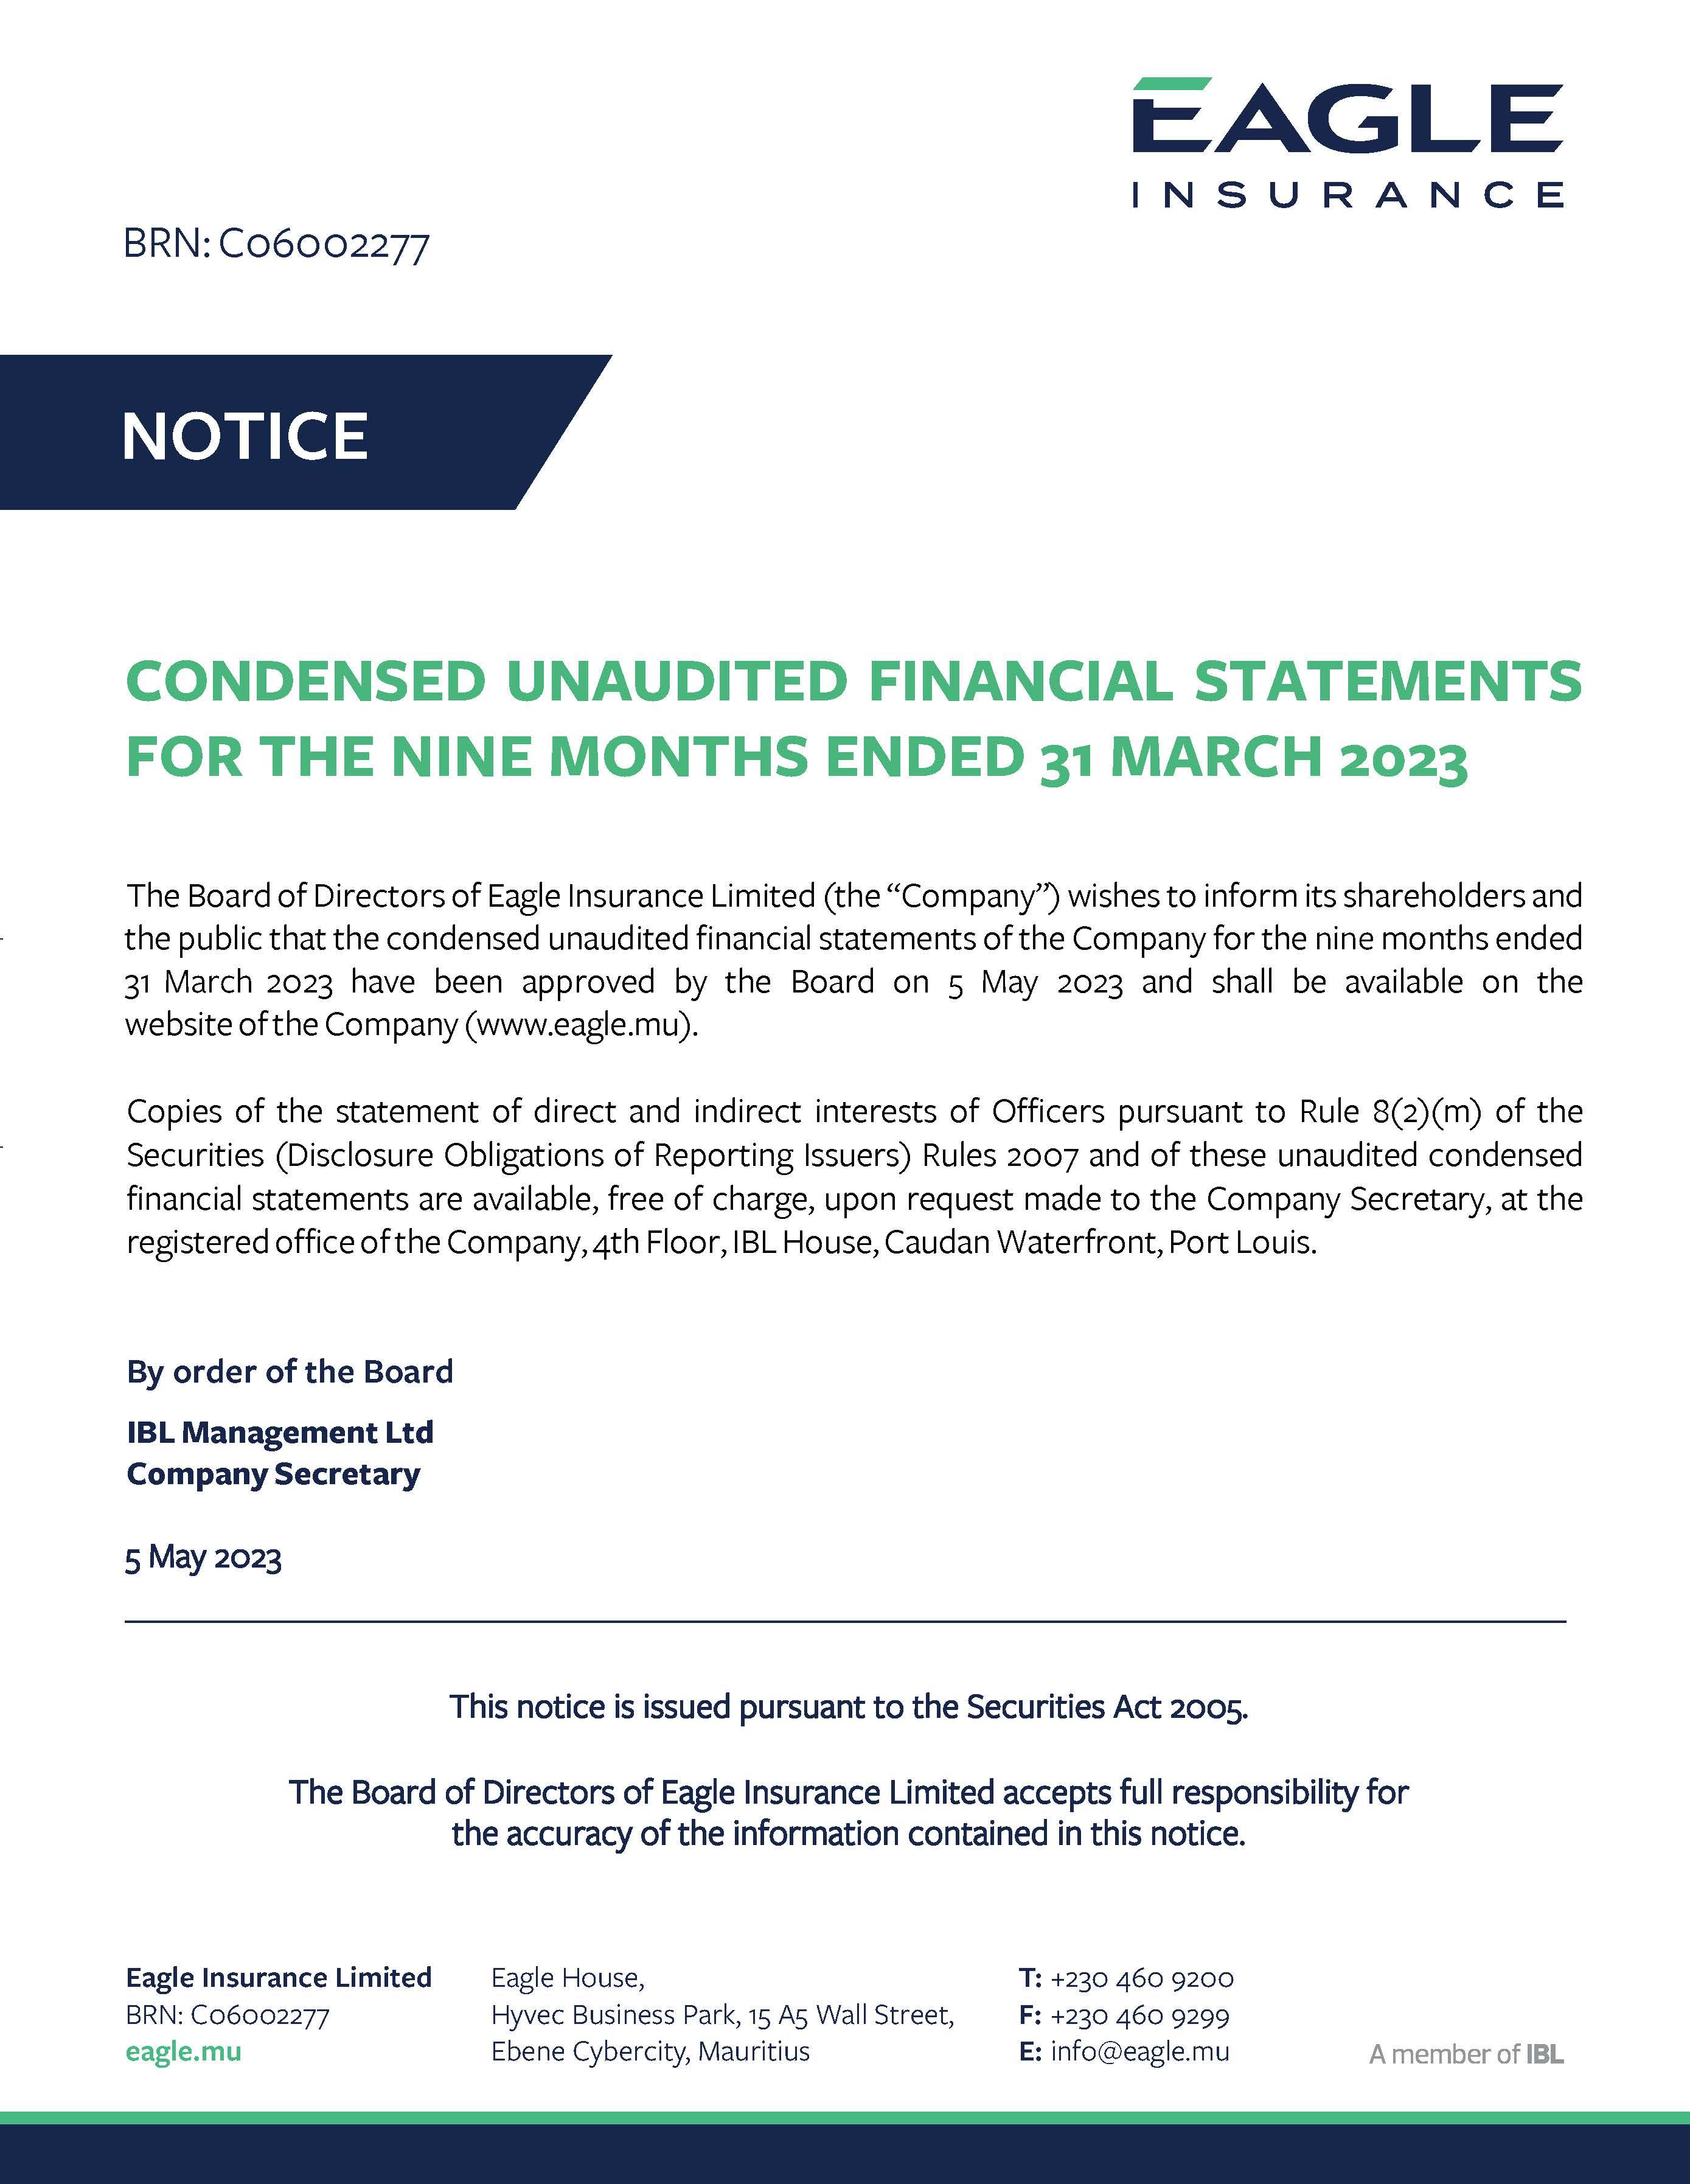 NOTICE - CONDENSED UNAUDITED FINANCIAL STATEMENTS FOR THE NINE MONTHS ENDED 31 MARCH 2023